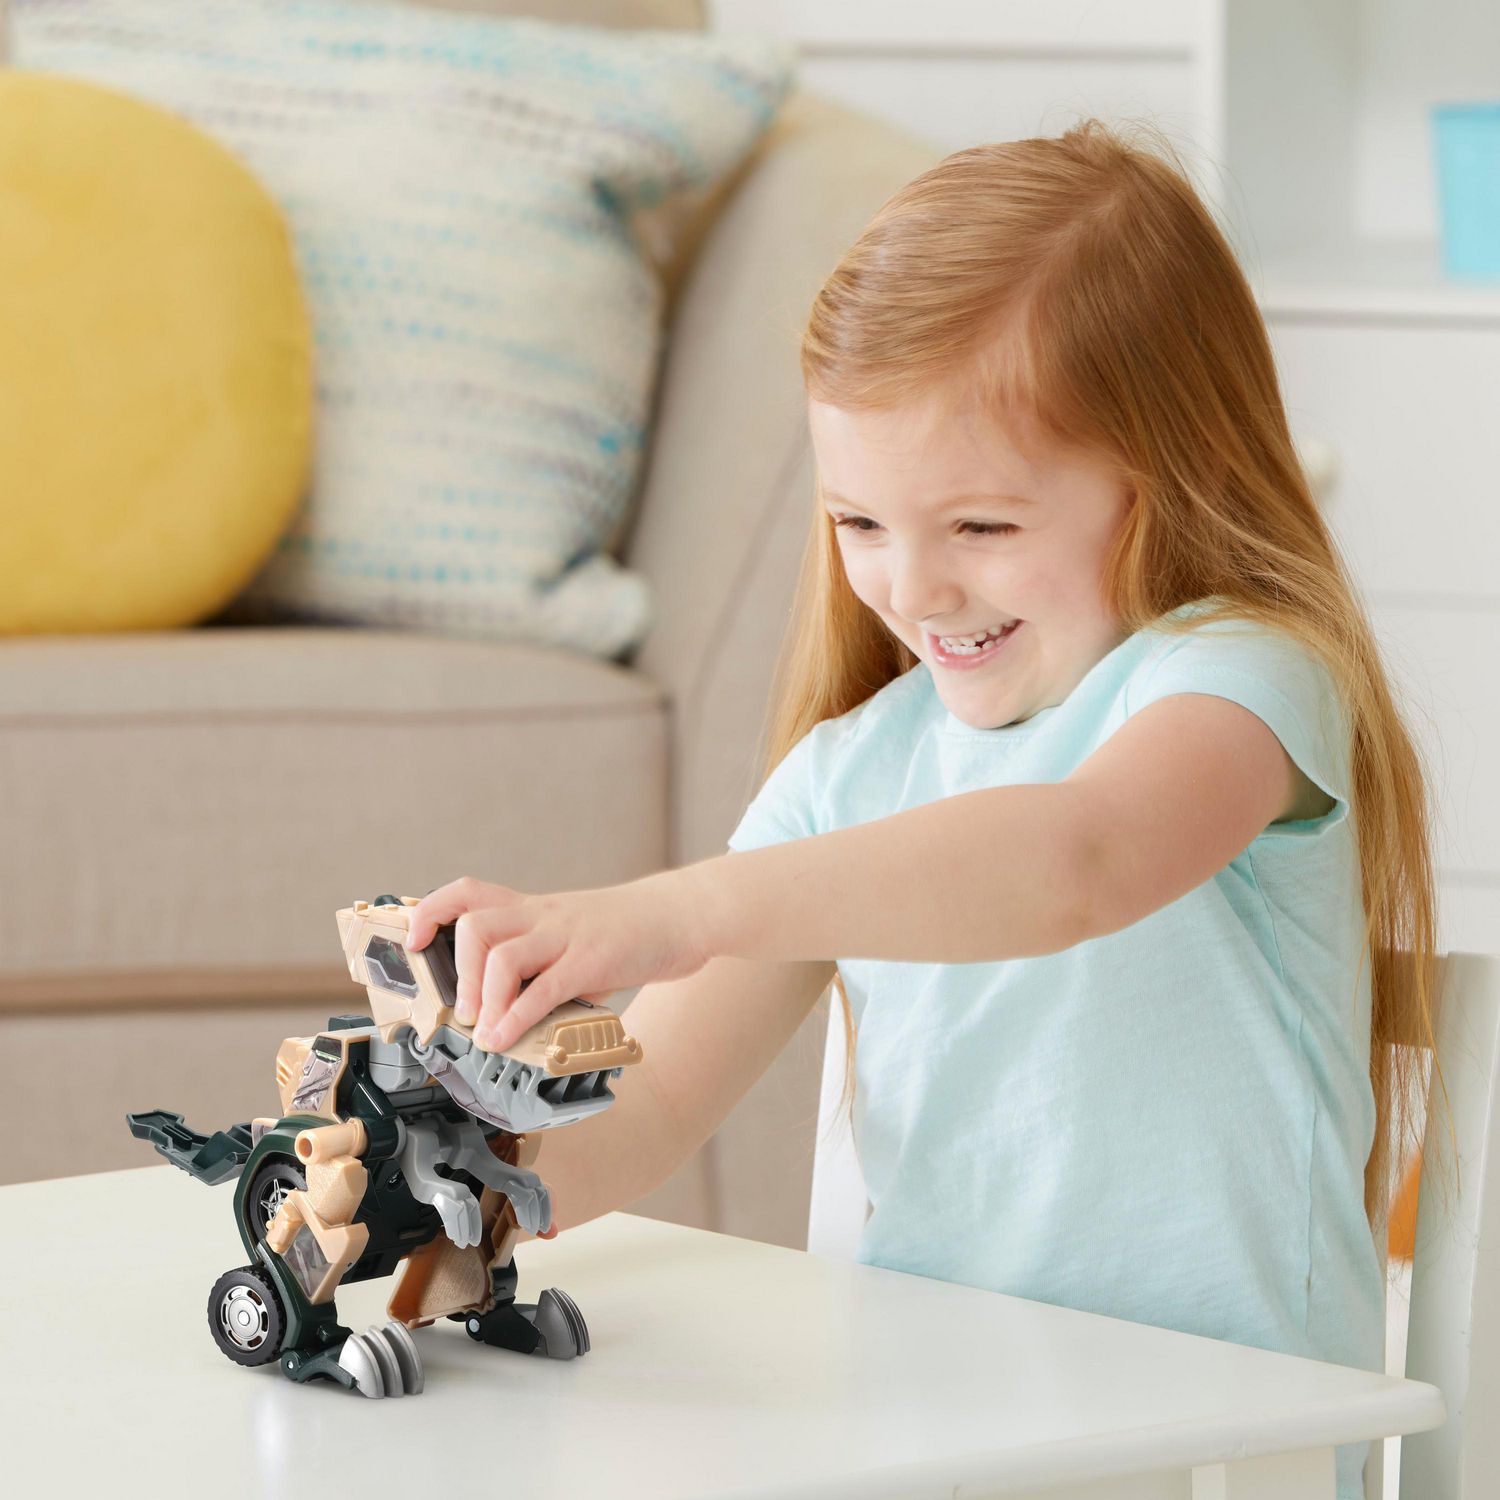 VTech Switch & Go T-Rex Off-Roader Transforming Dinosaur to Vehicle Toy -  English Version, 4+ Years